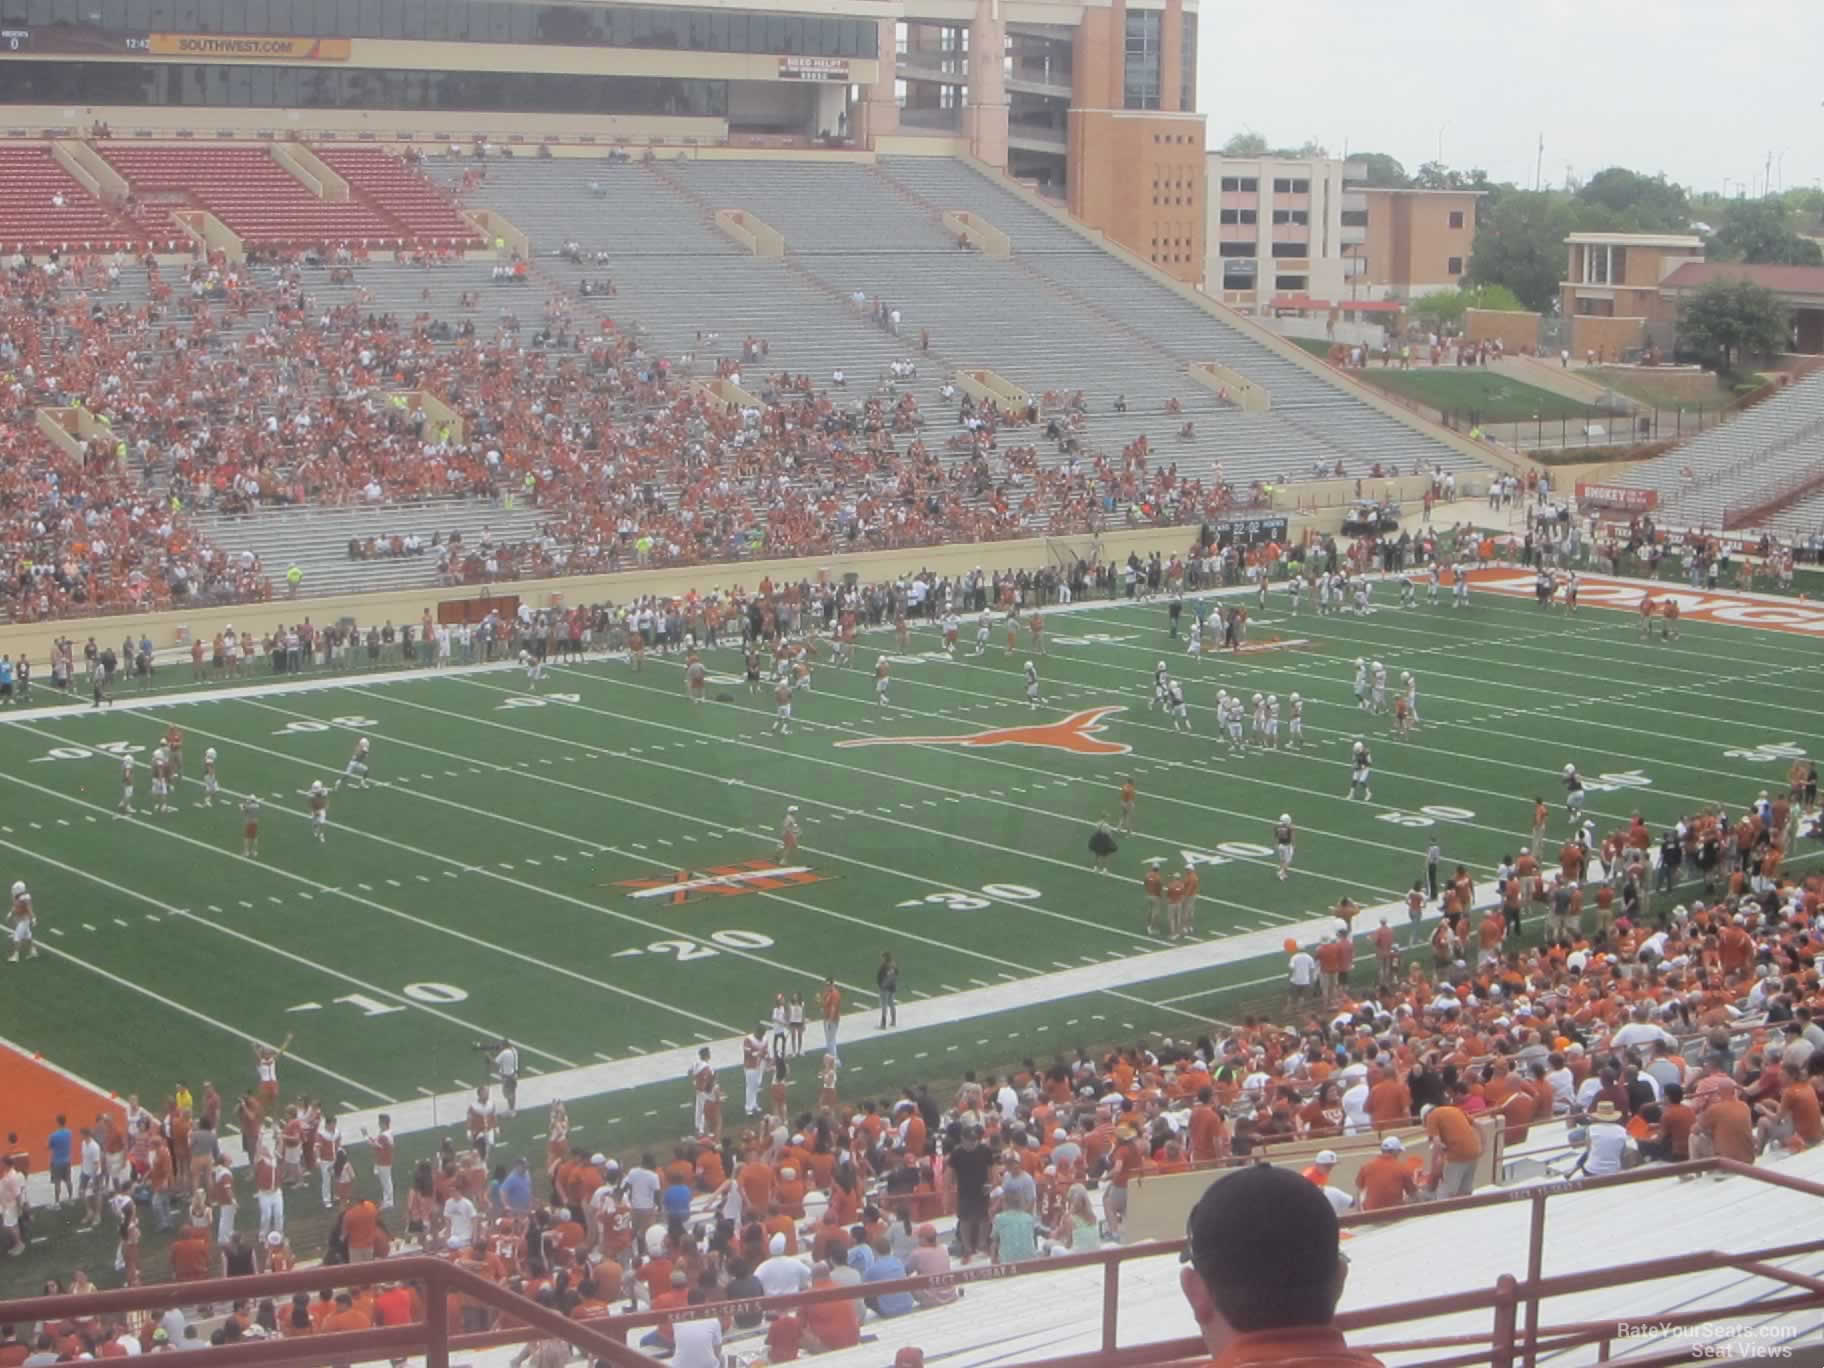 section 9, row 61 seat view  - dkr-texas memorial stadium